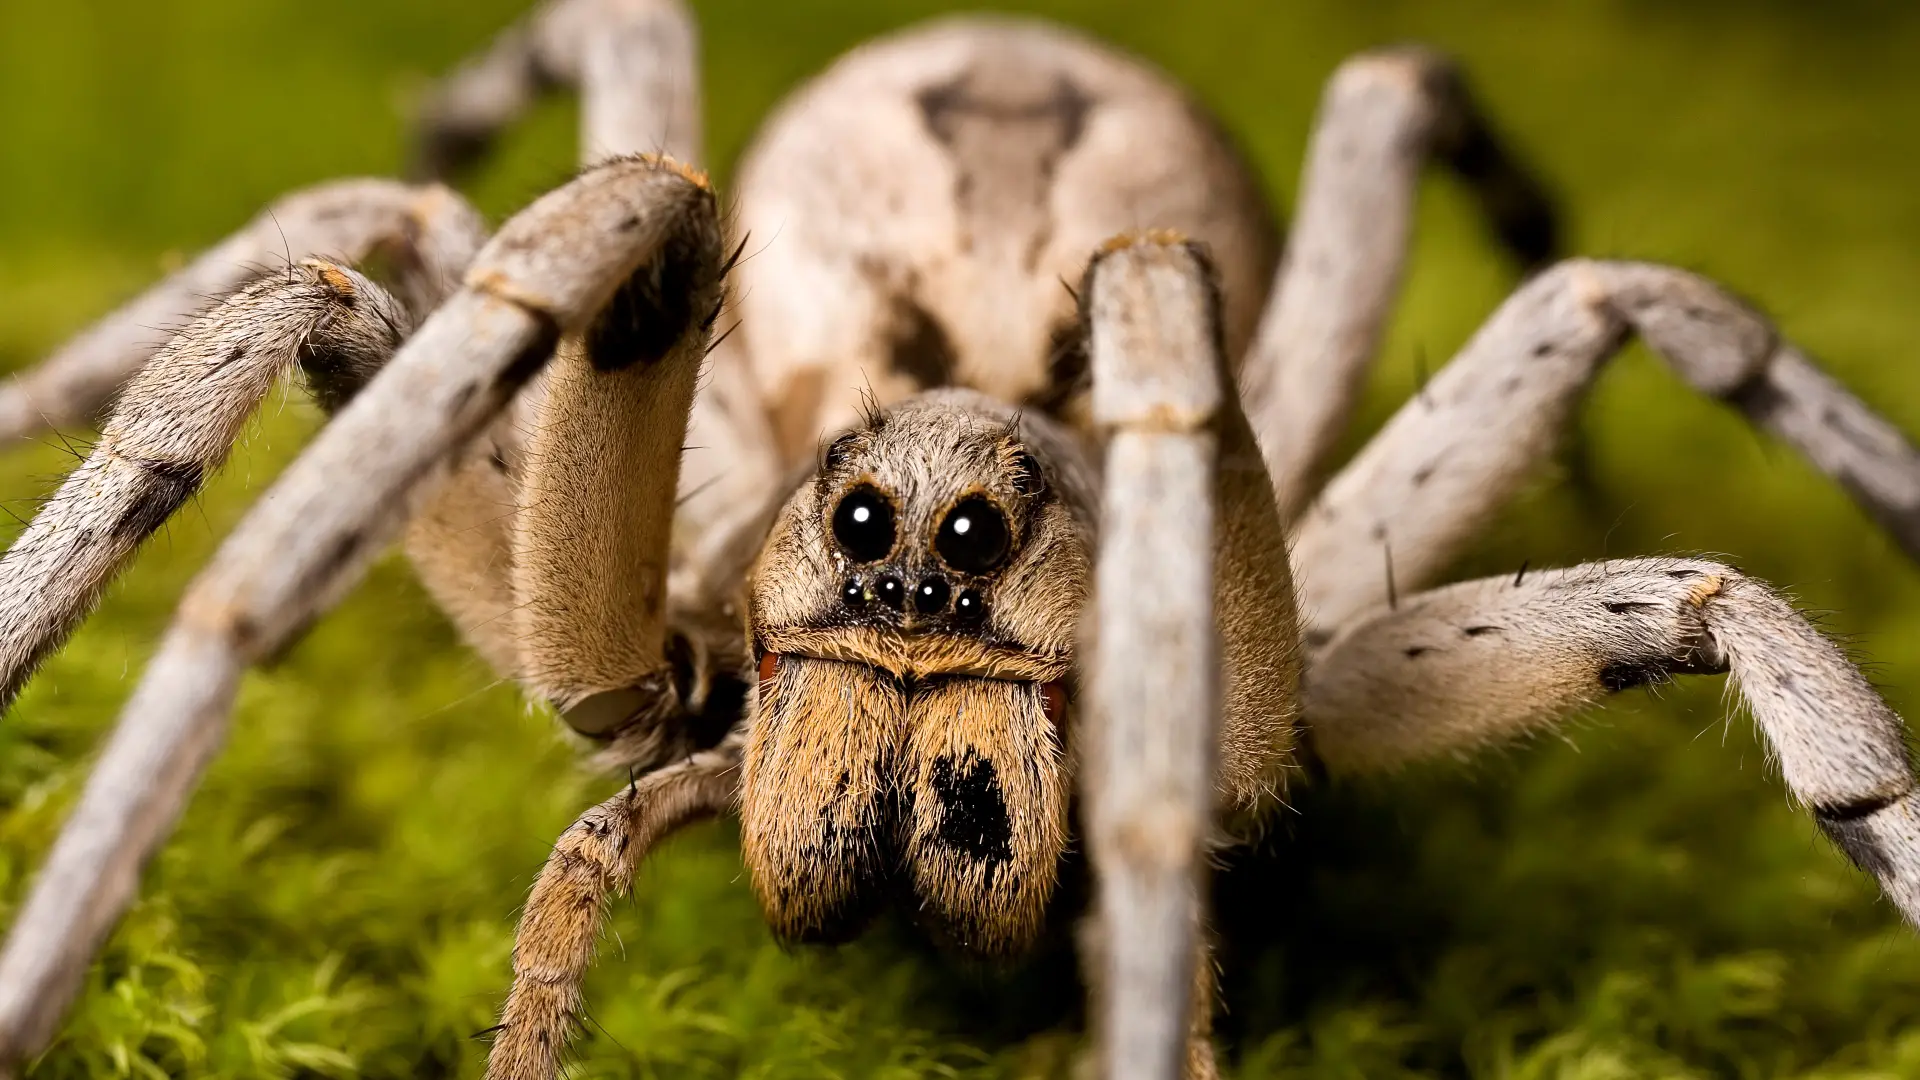 4. Wolf Spiders